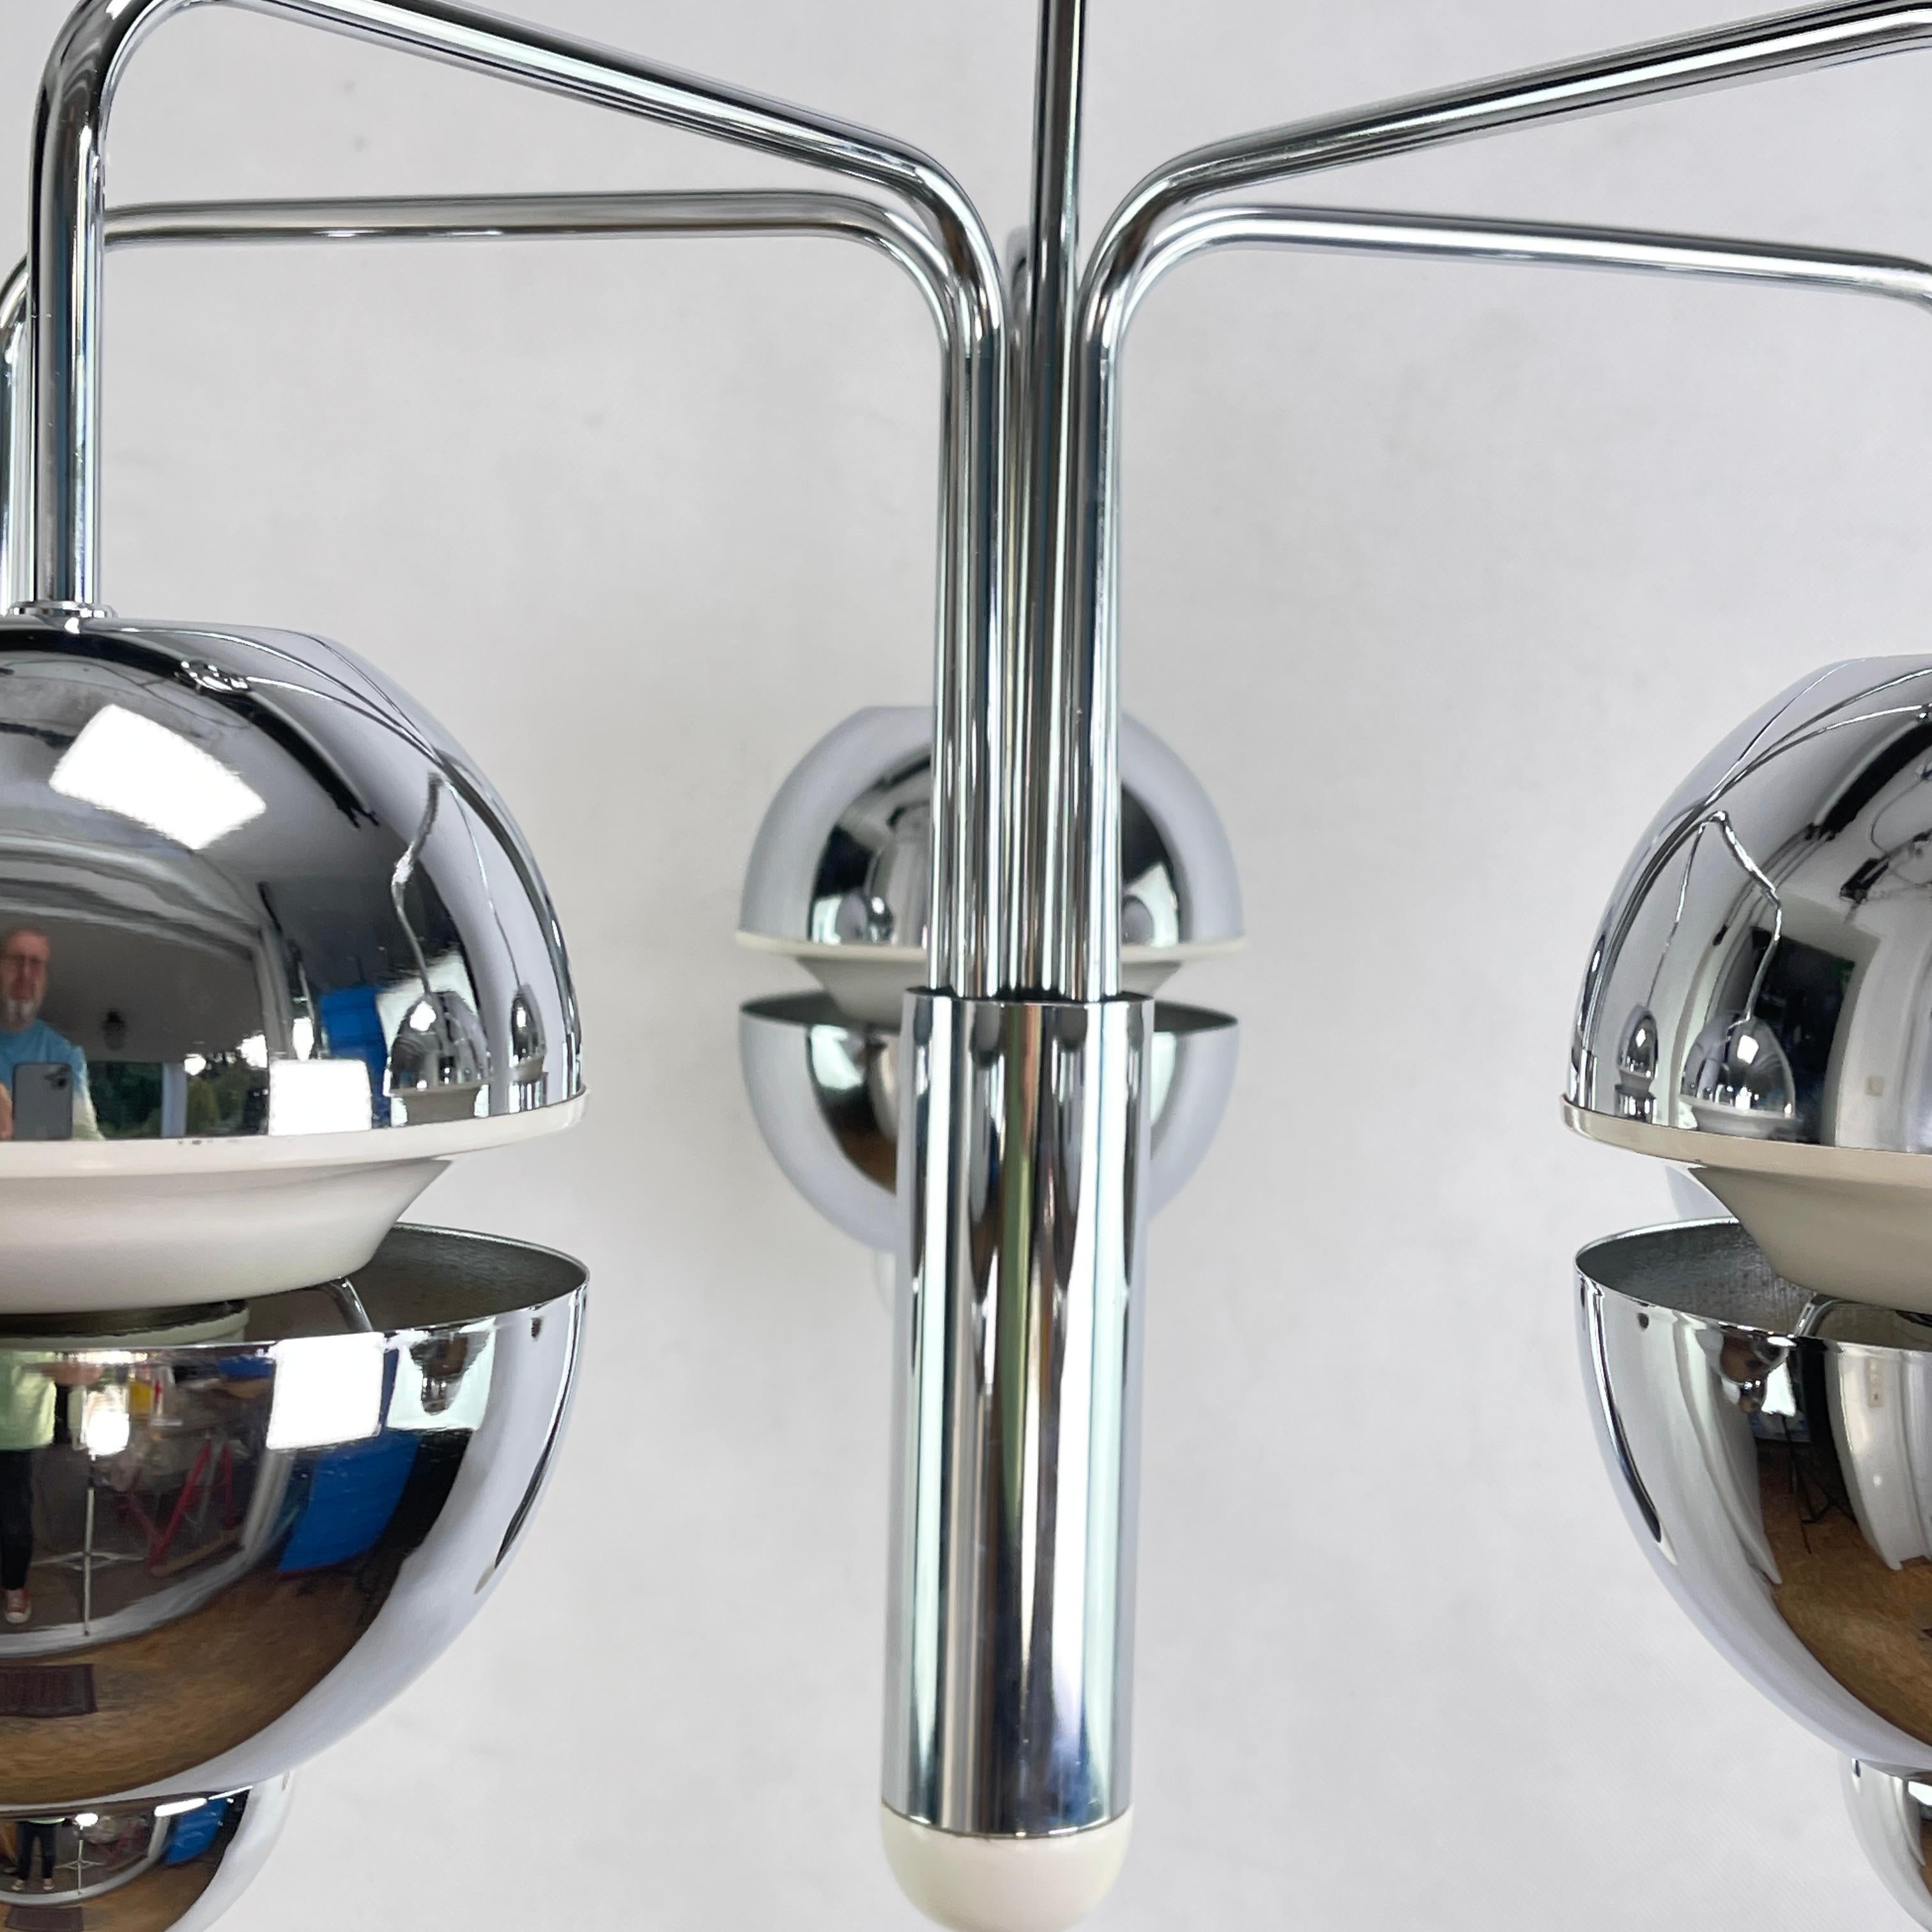 beautiful Sputnik ceiling light by Richard Essig- 1970s

This stylish Sputnik chrome lamp from the 1970s is a timeless design piece that perfectly embodies the charm and elegance of the era. With its striking sputnik design, this lamp is a real